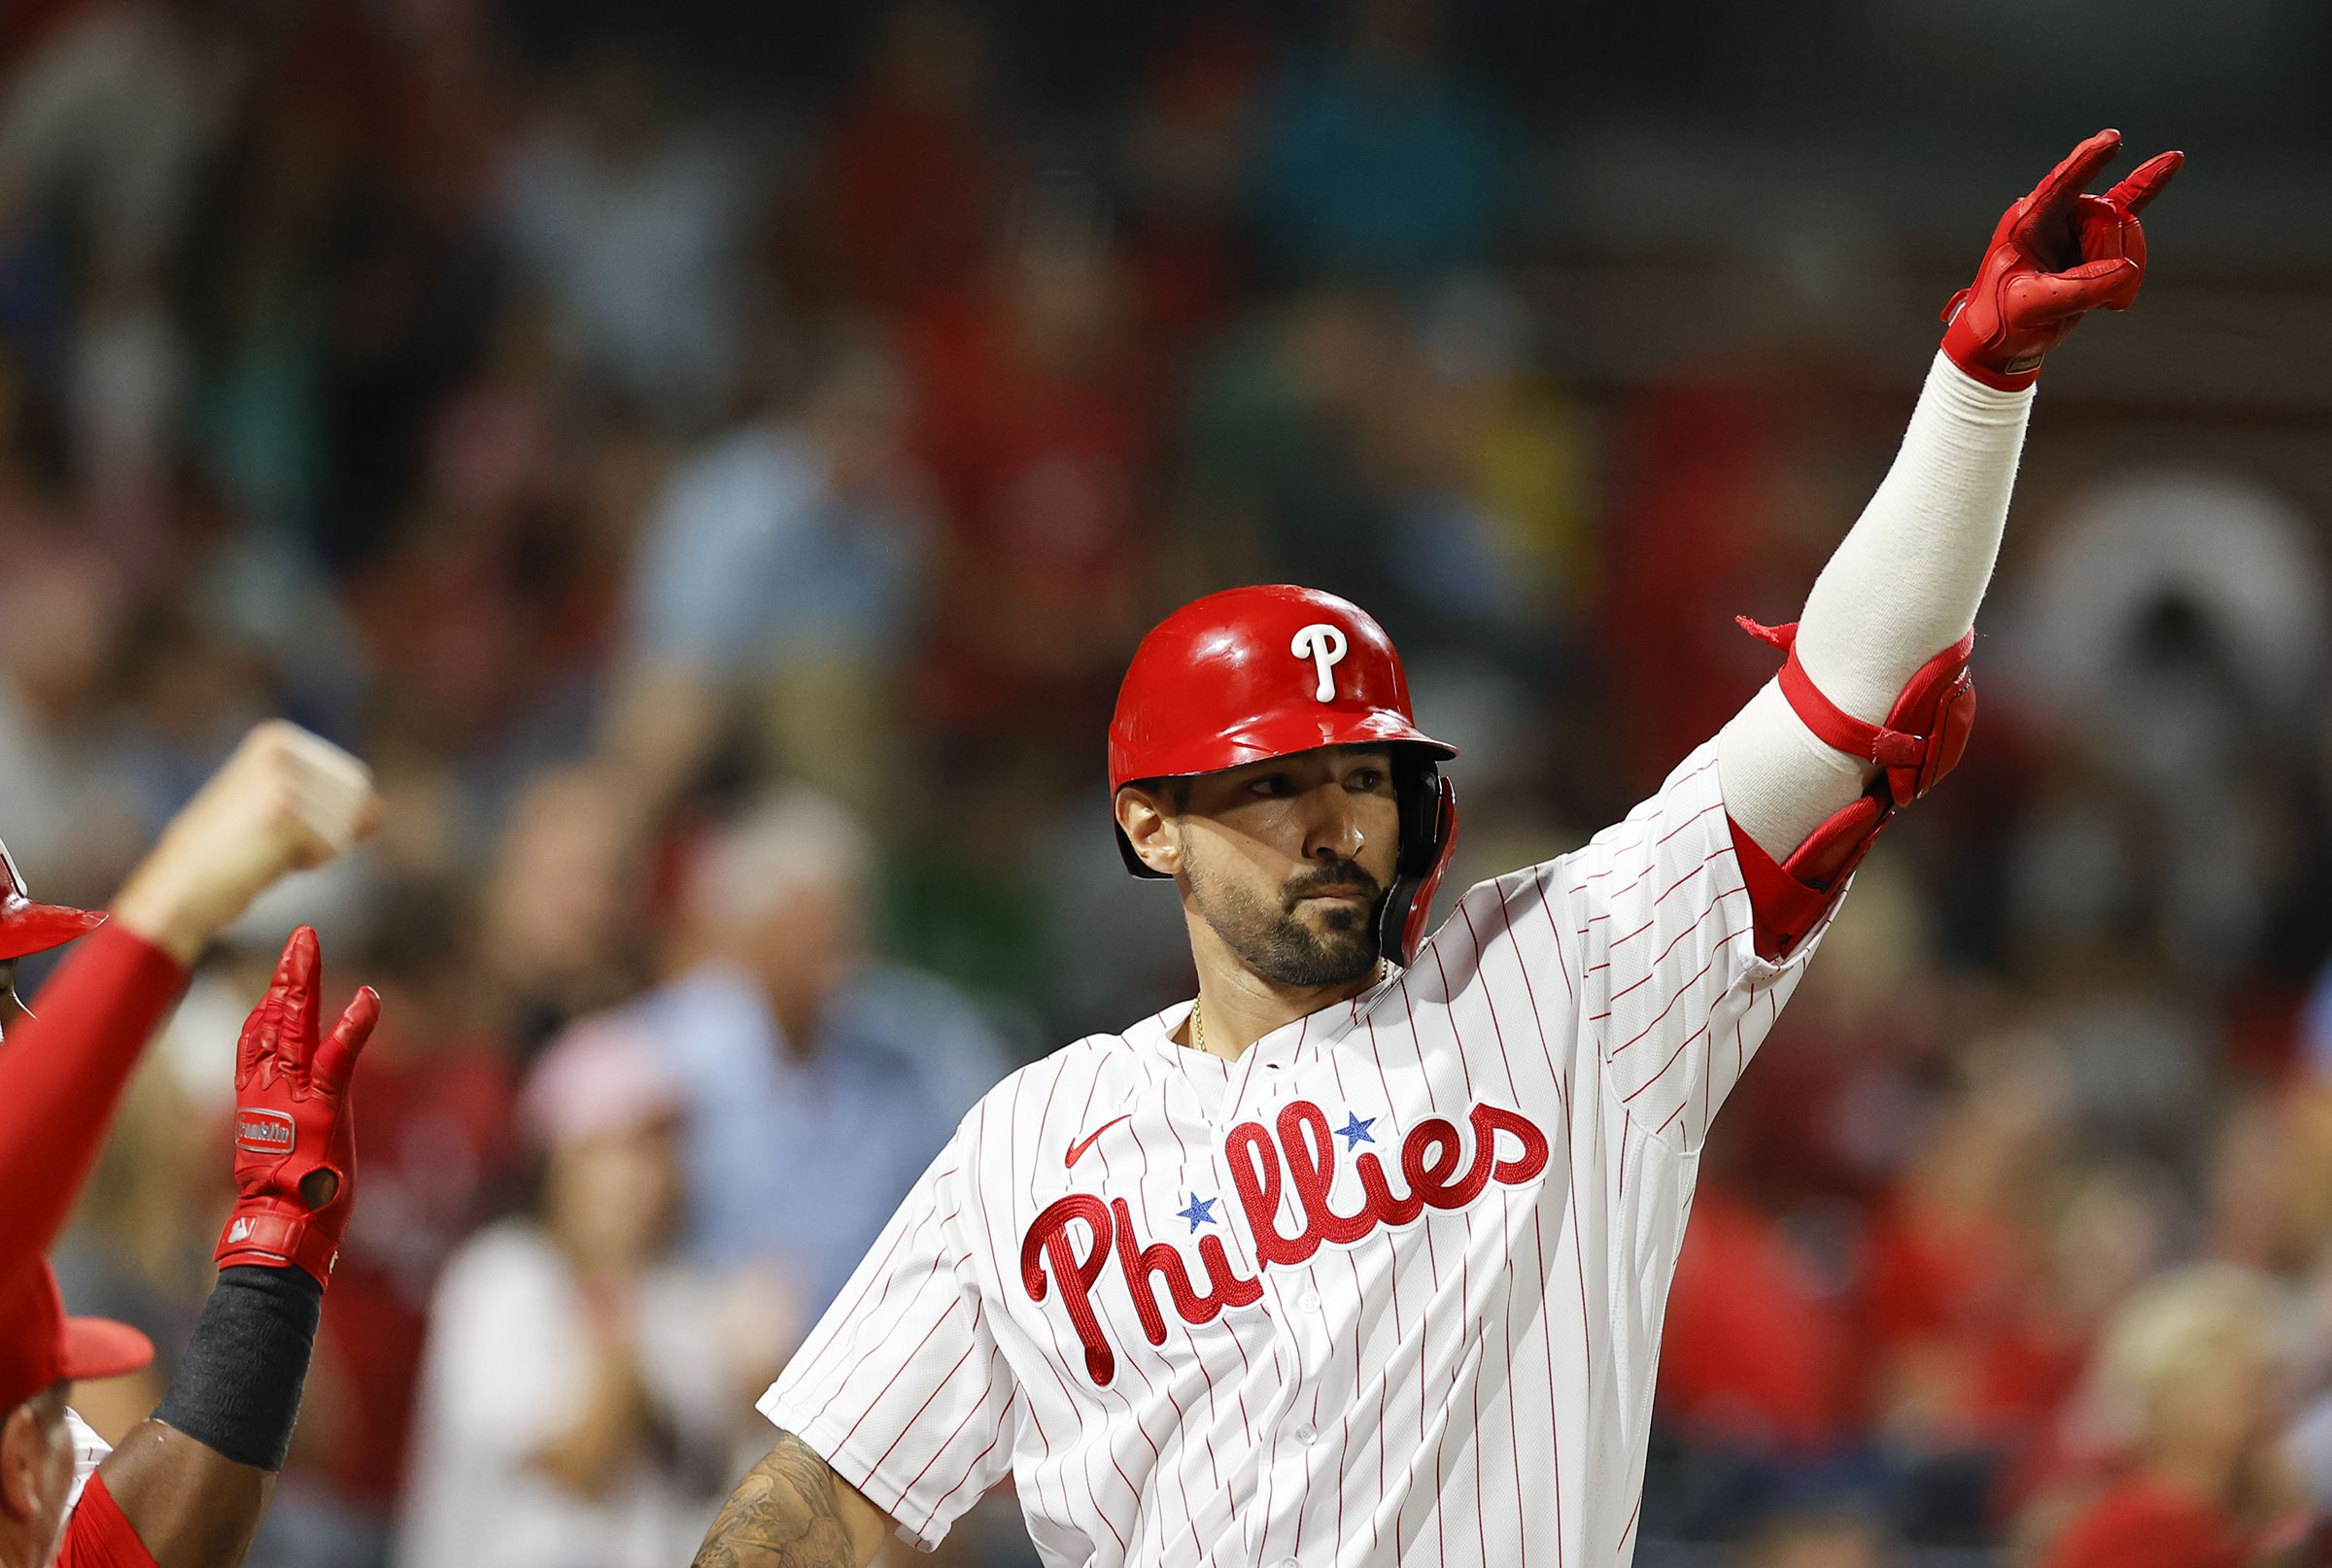 Phillies win 5-4 over New York Mets, Nick Castellanos sets career mark with  103rd RBI